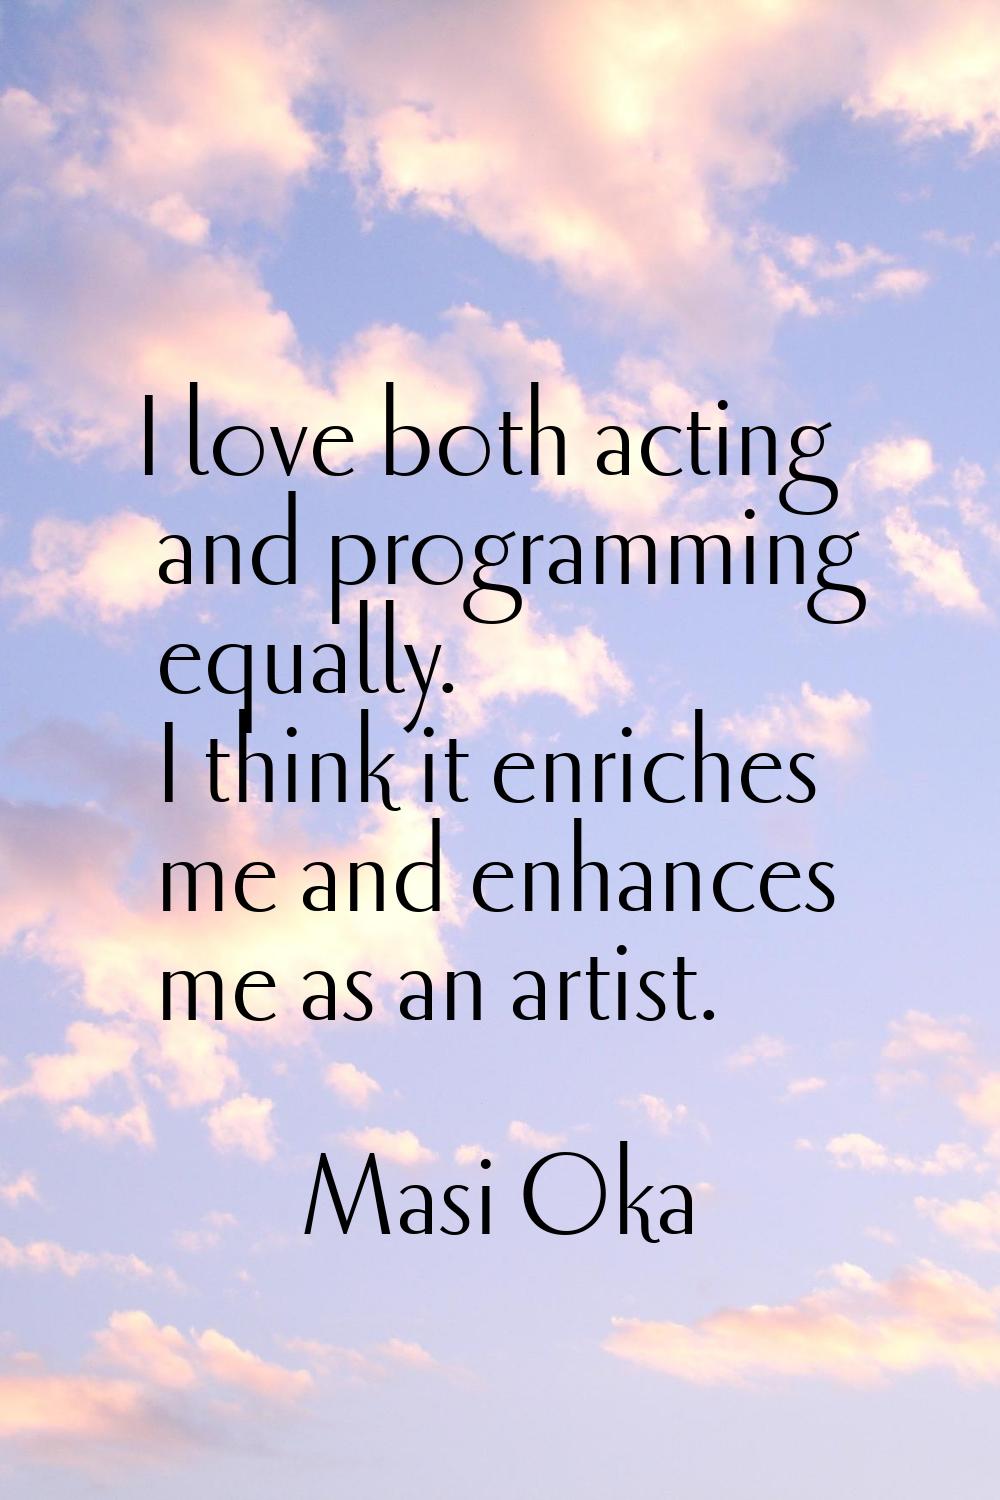 I love both acting and programming equally. I think it enriches me and enhances me as an artist.